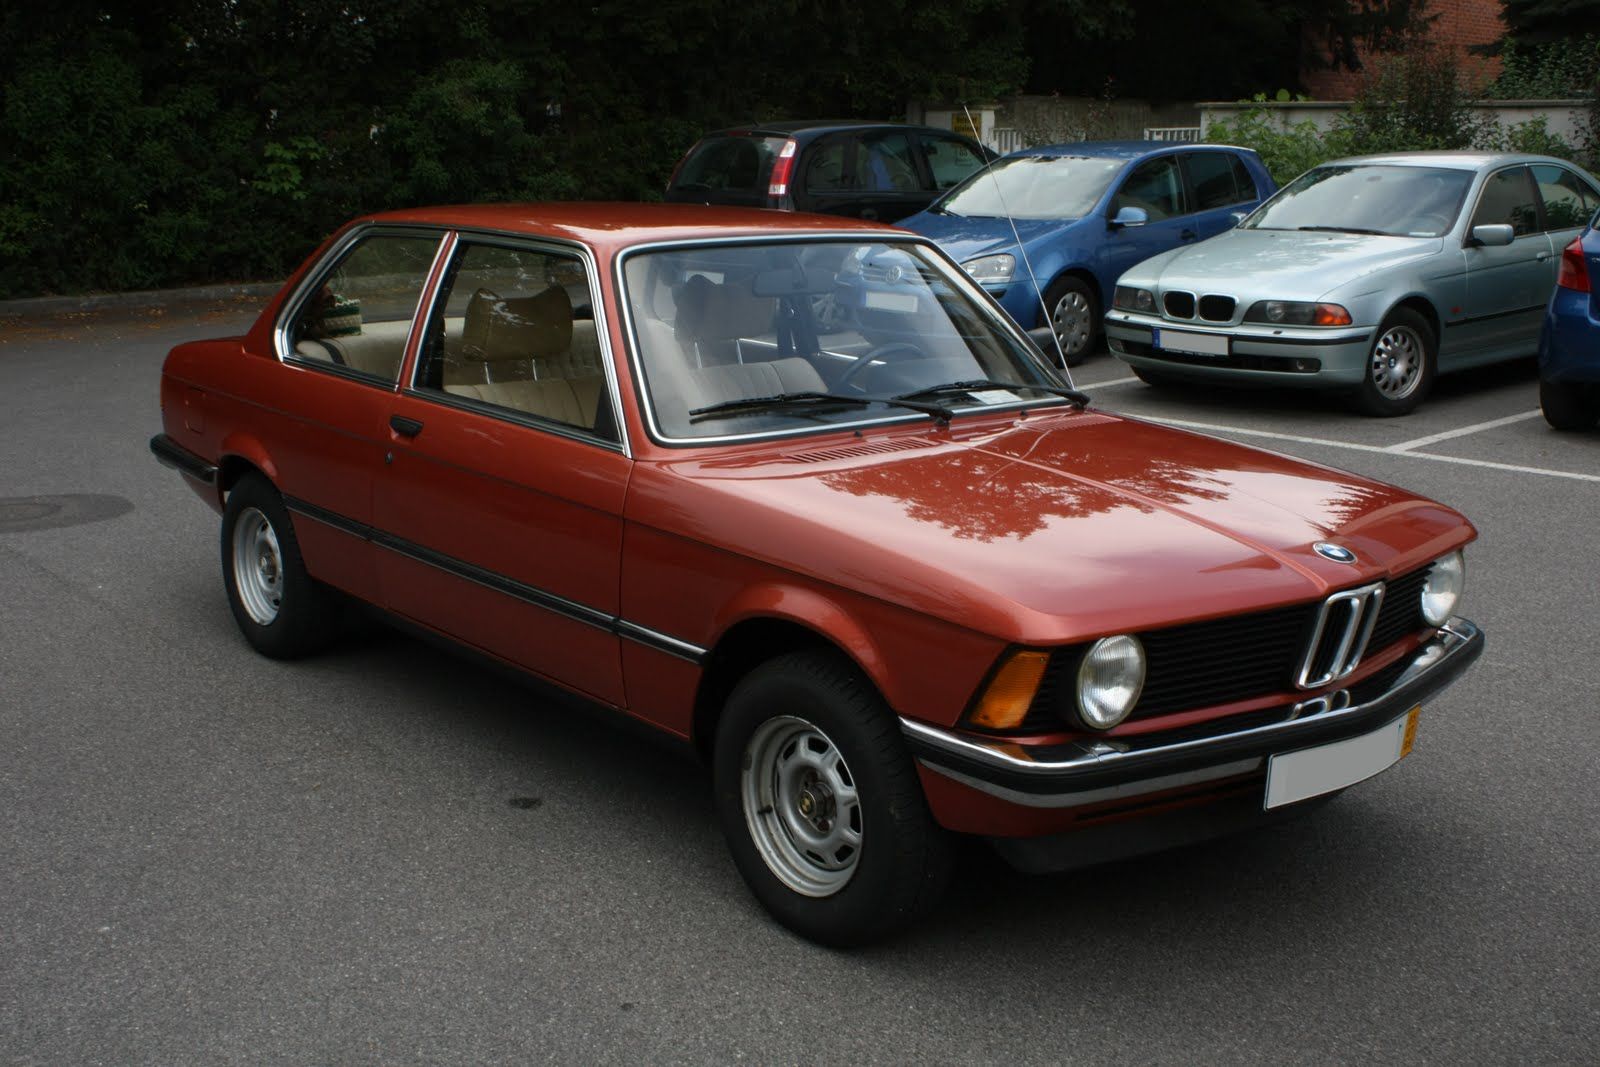 The BMW E21 is a classic